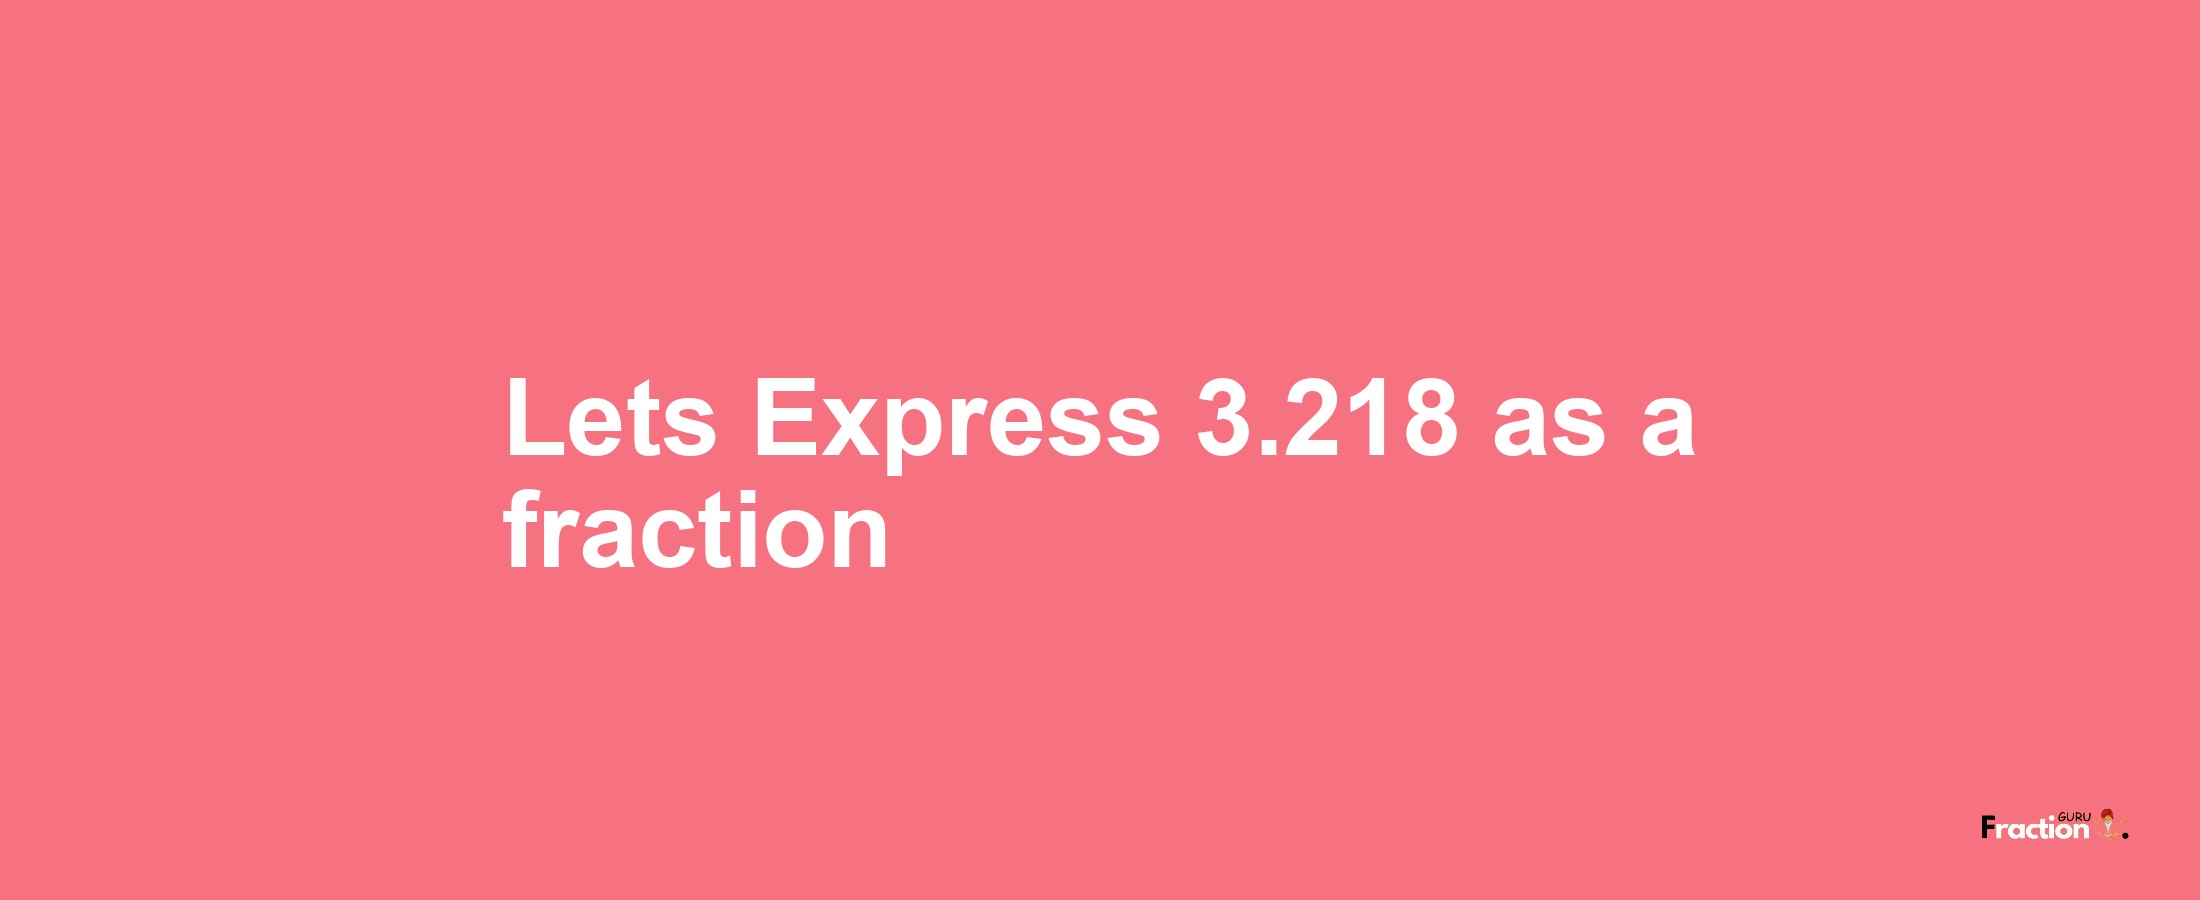 Lets Express 3.218 as afraction